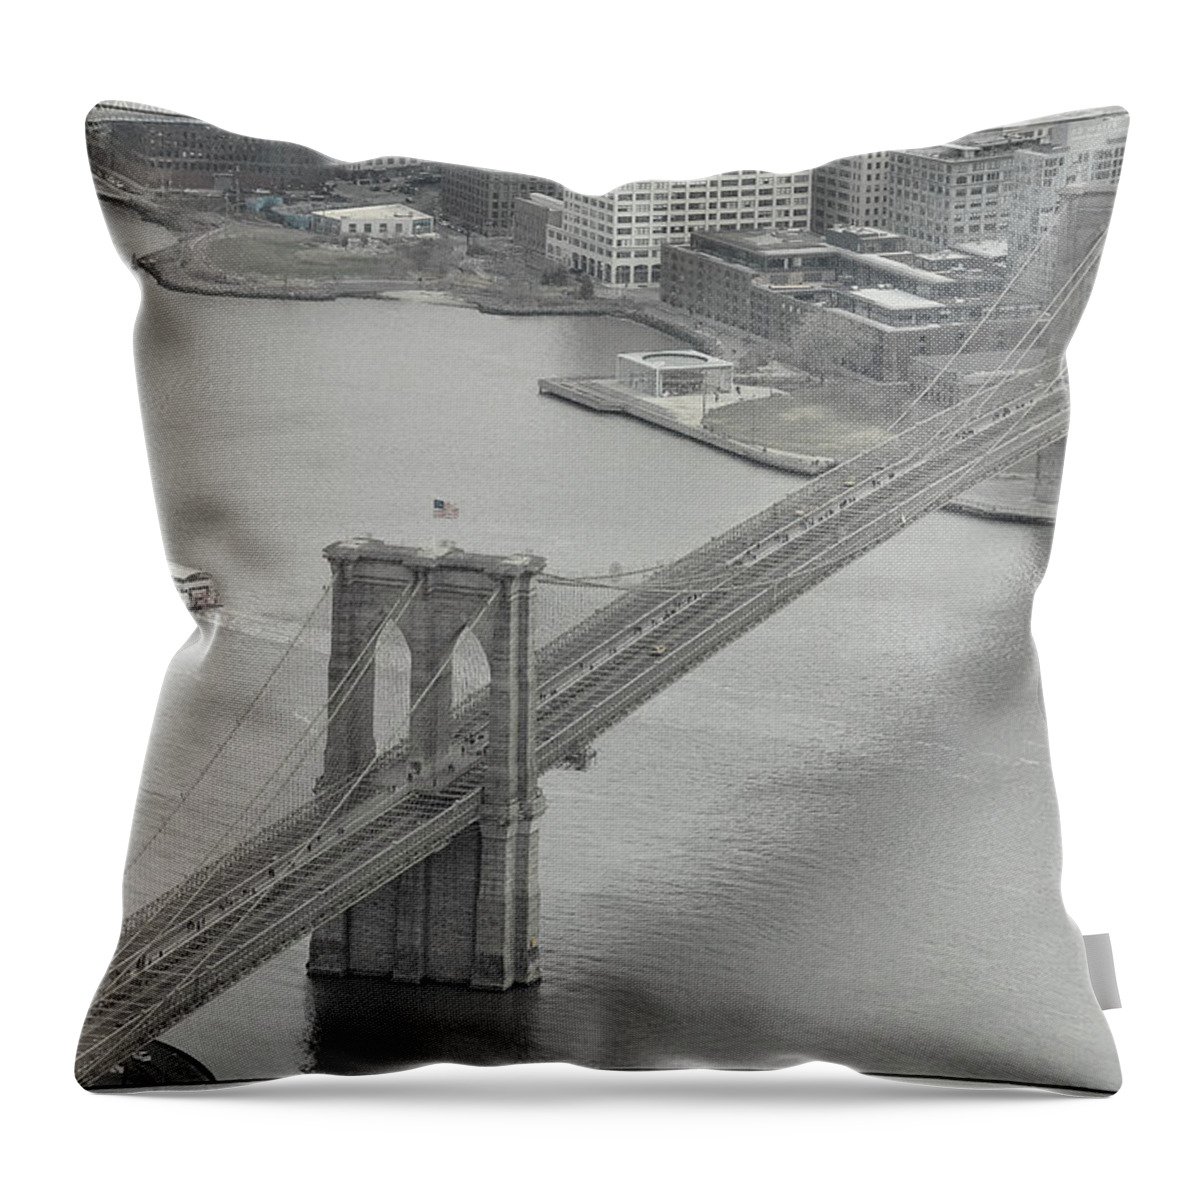 Brooklyn Bridge Throw Pillow featuring the photograph The Brooklyn Bridge From Above by Dyle Warren